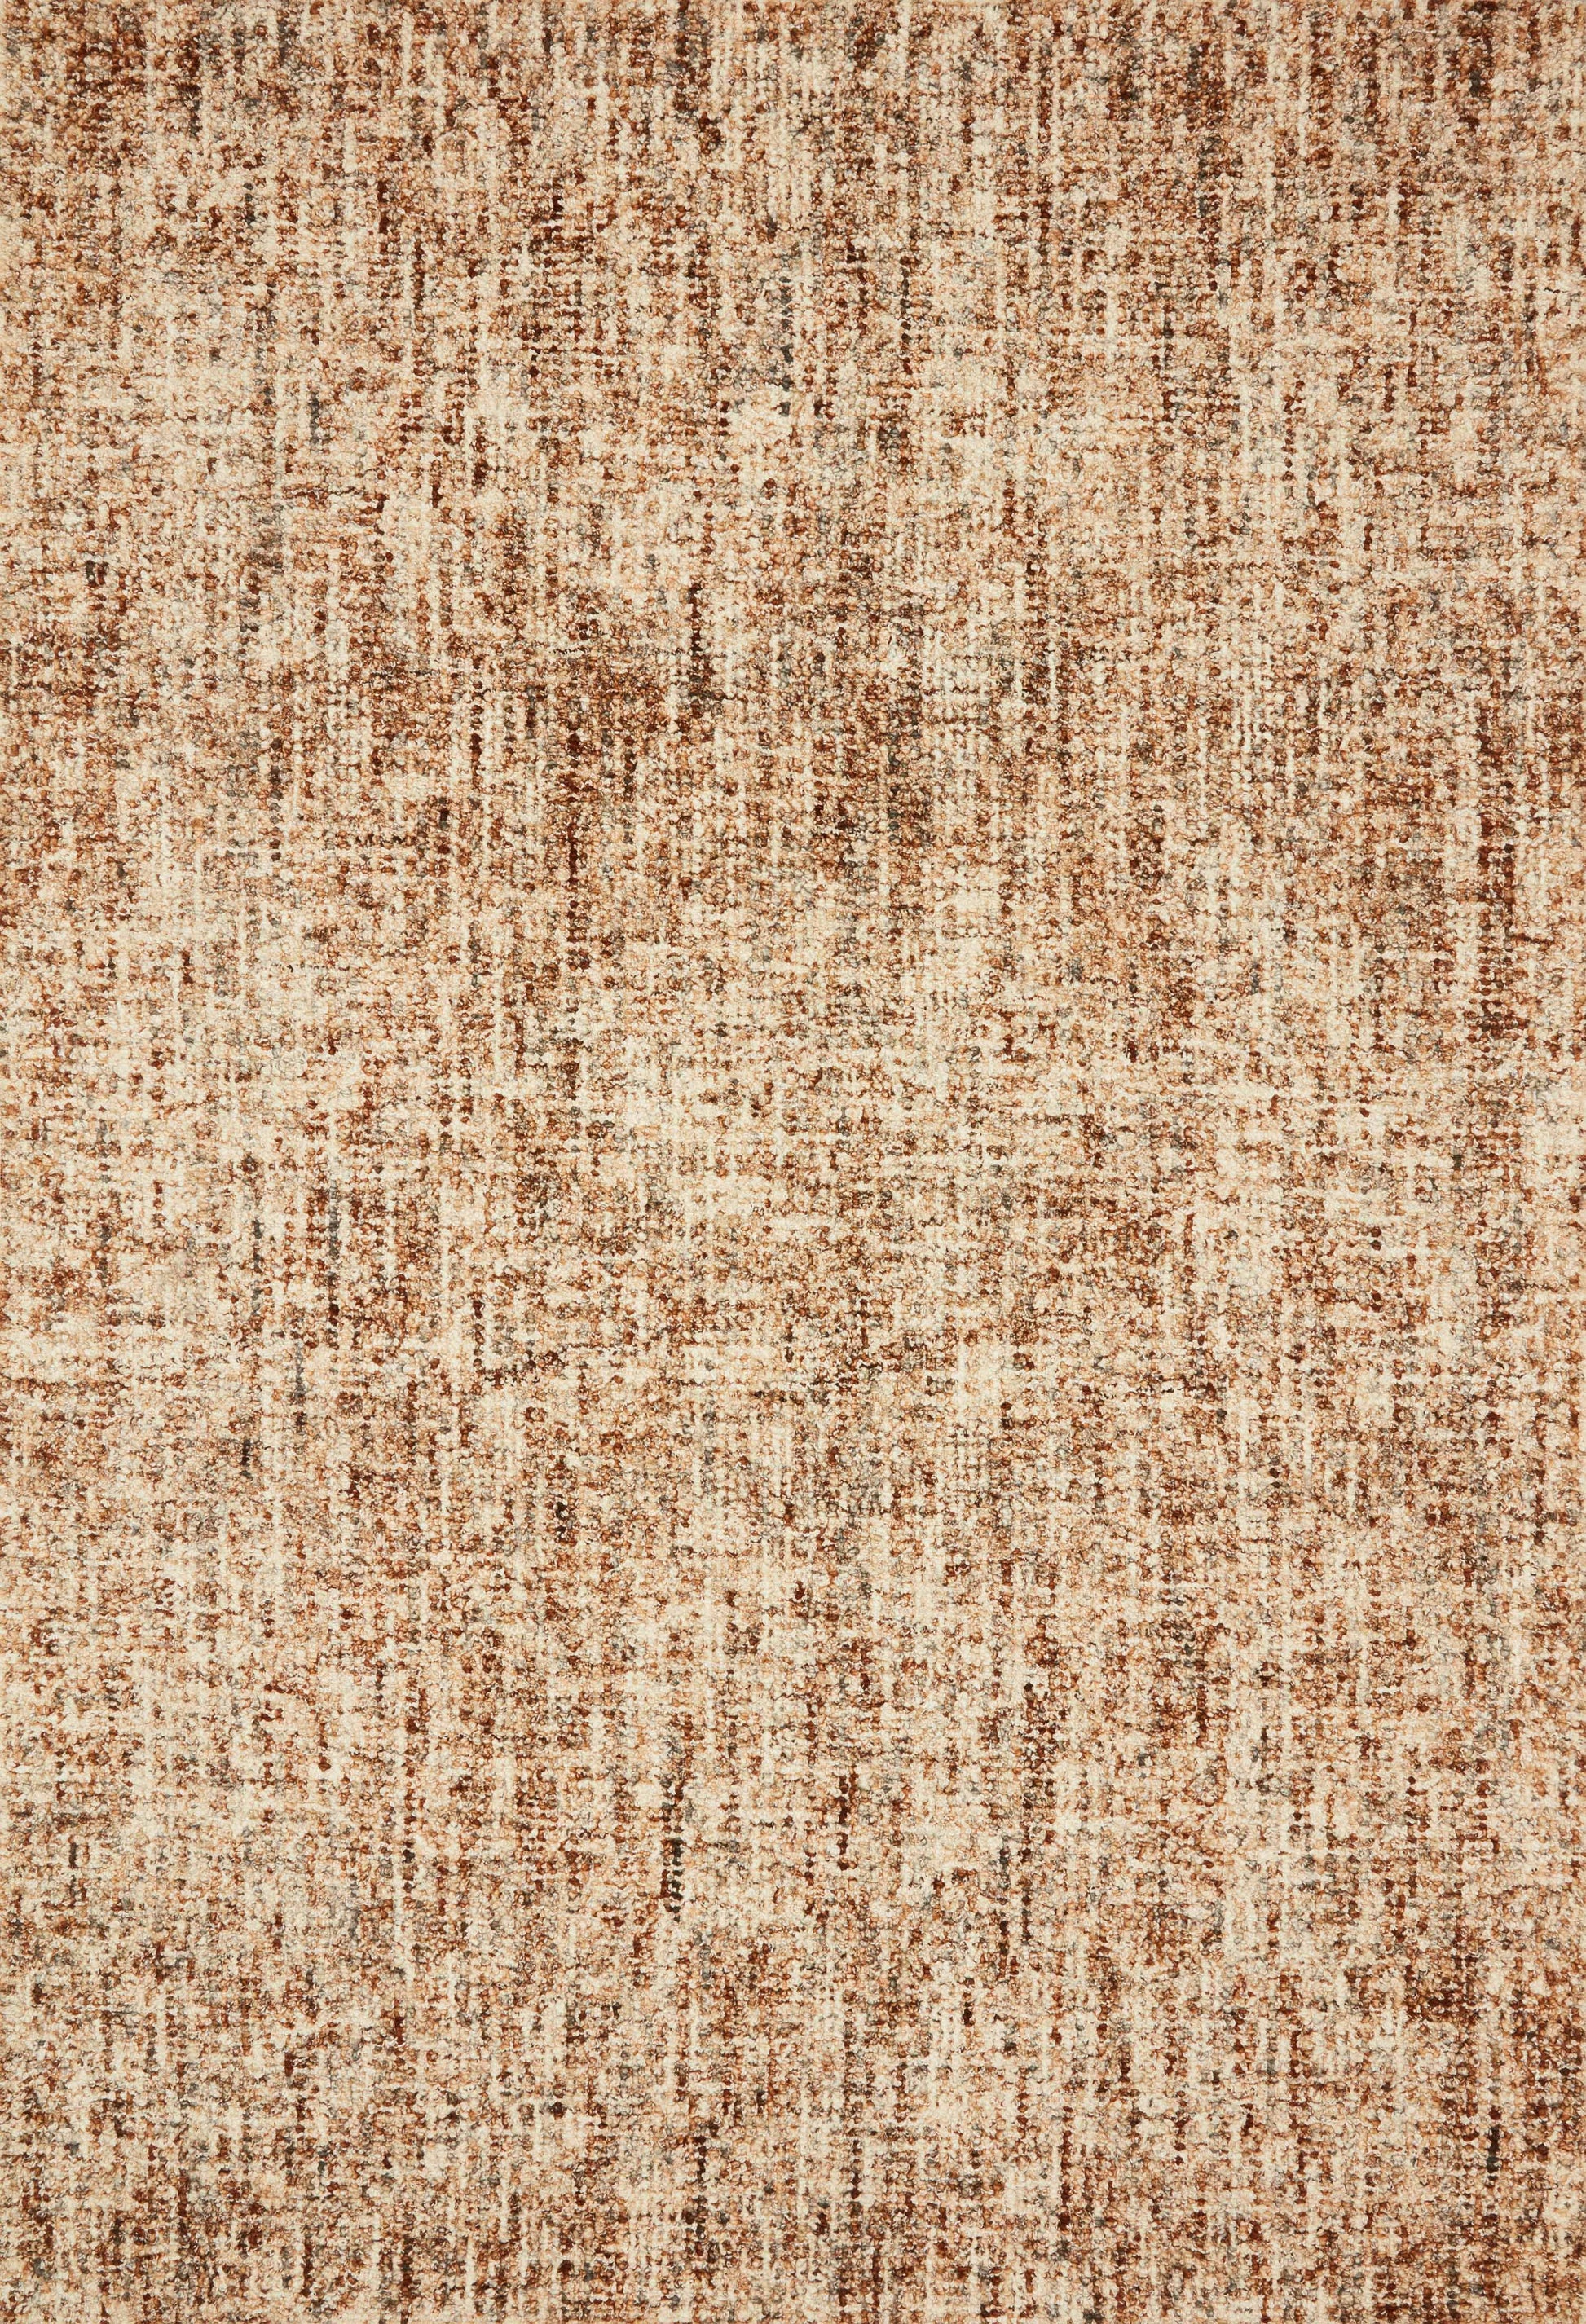 A picture of Loloi's Harlow rug, in style HLO-01, color Rust / Charcoal